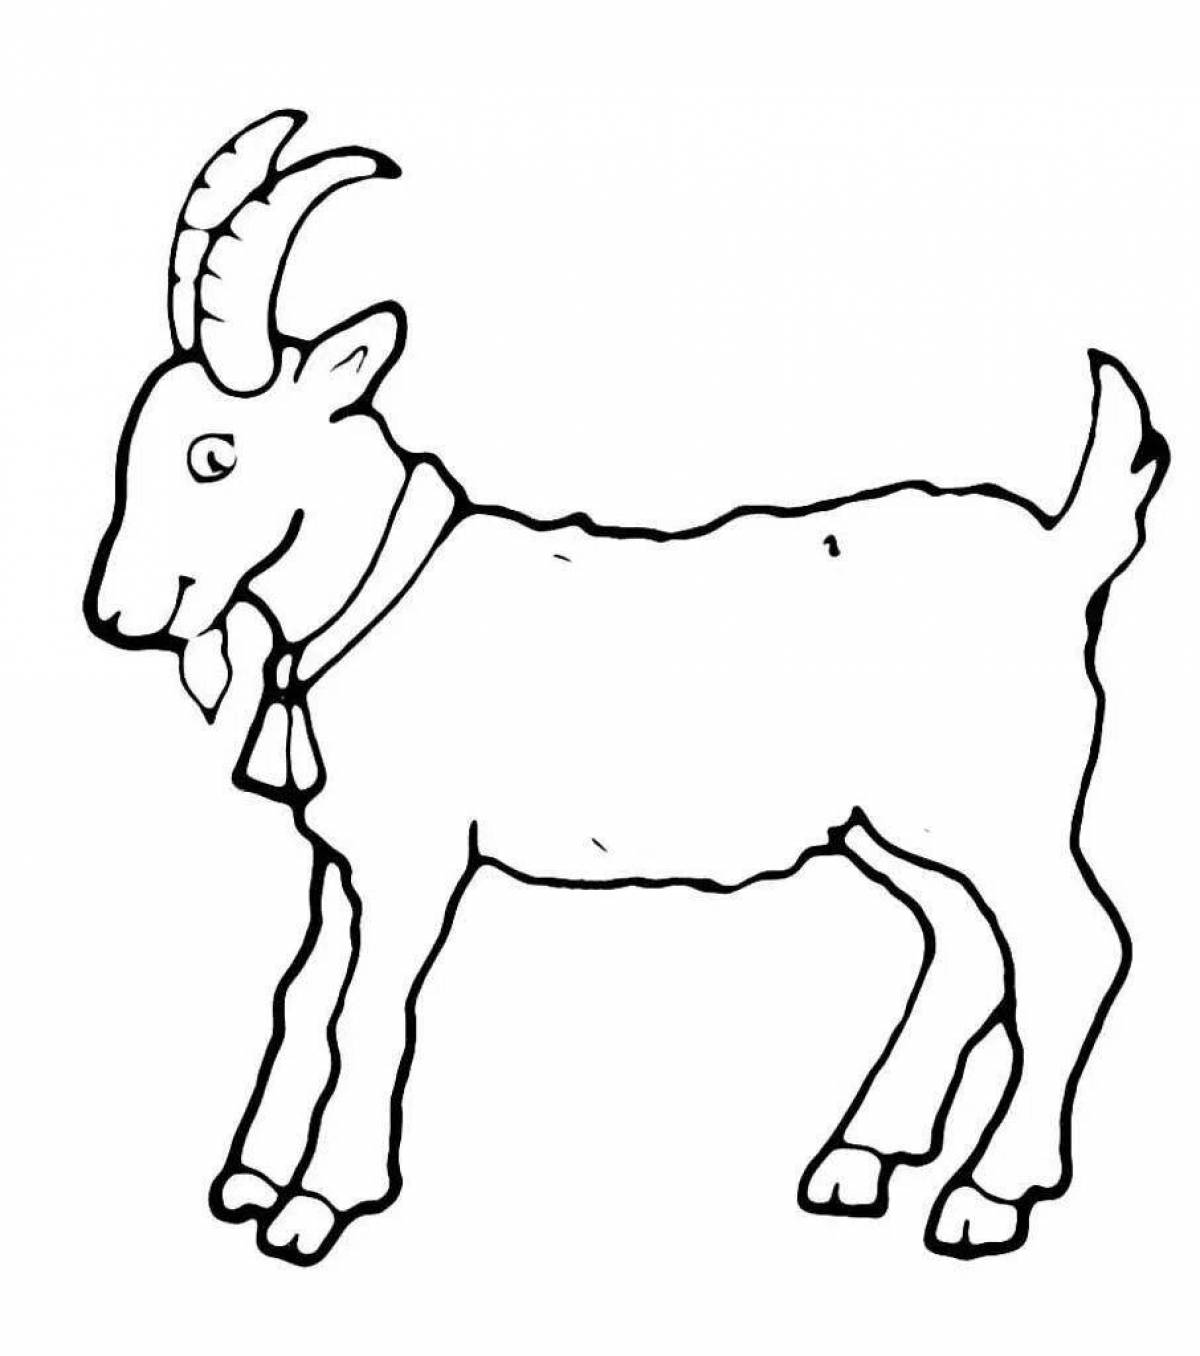 Coloring cute goat for kids